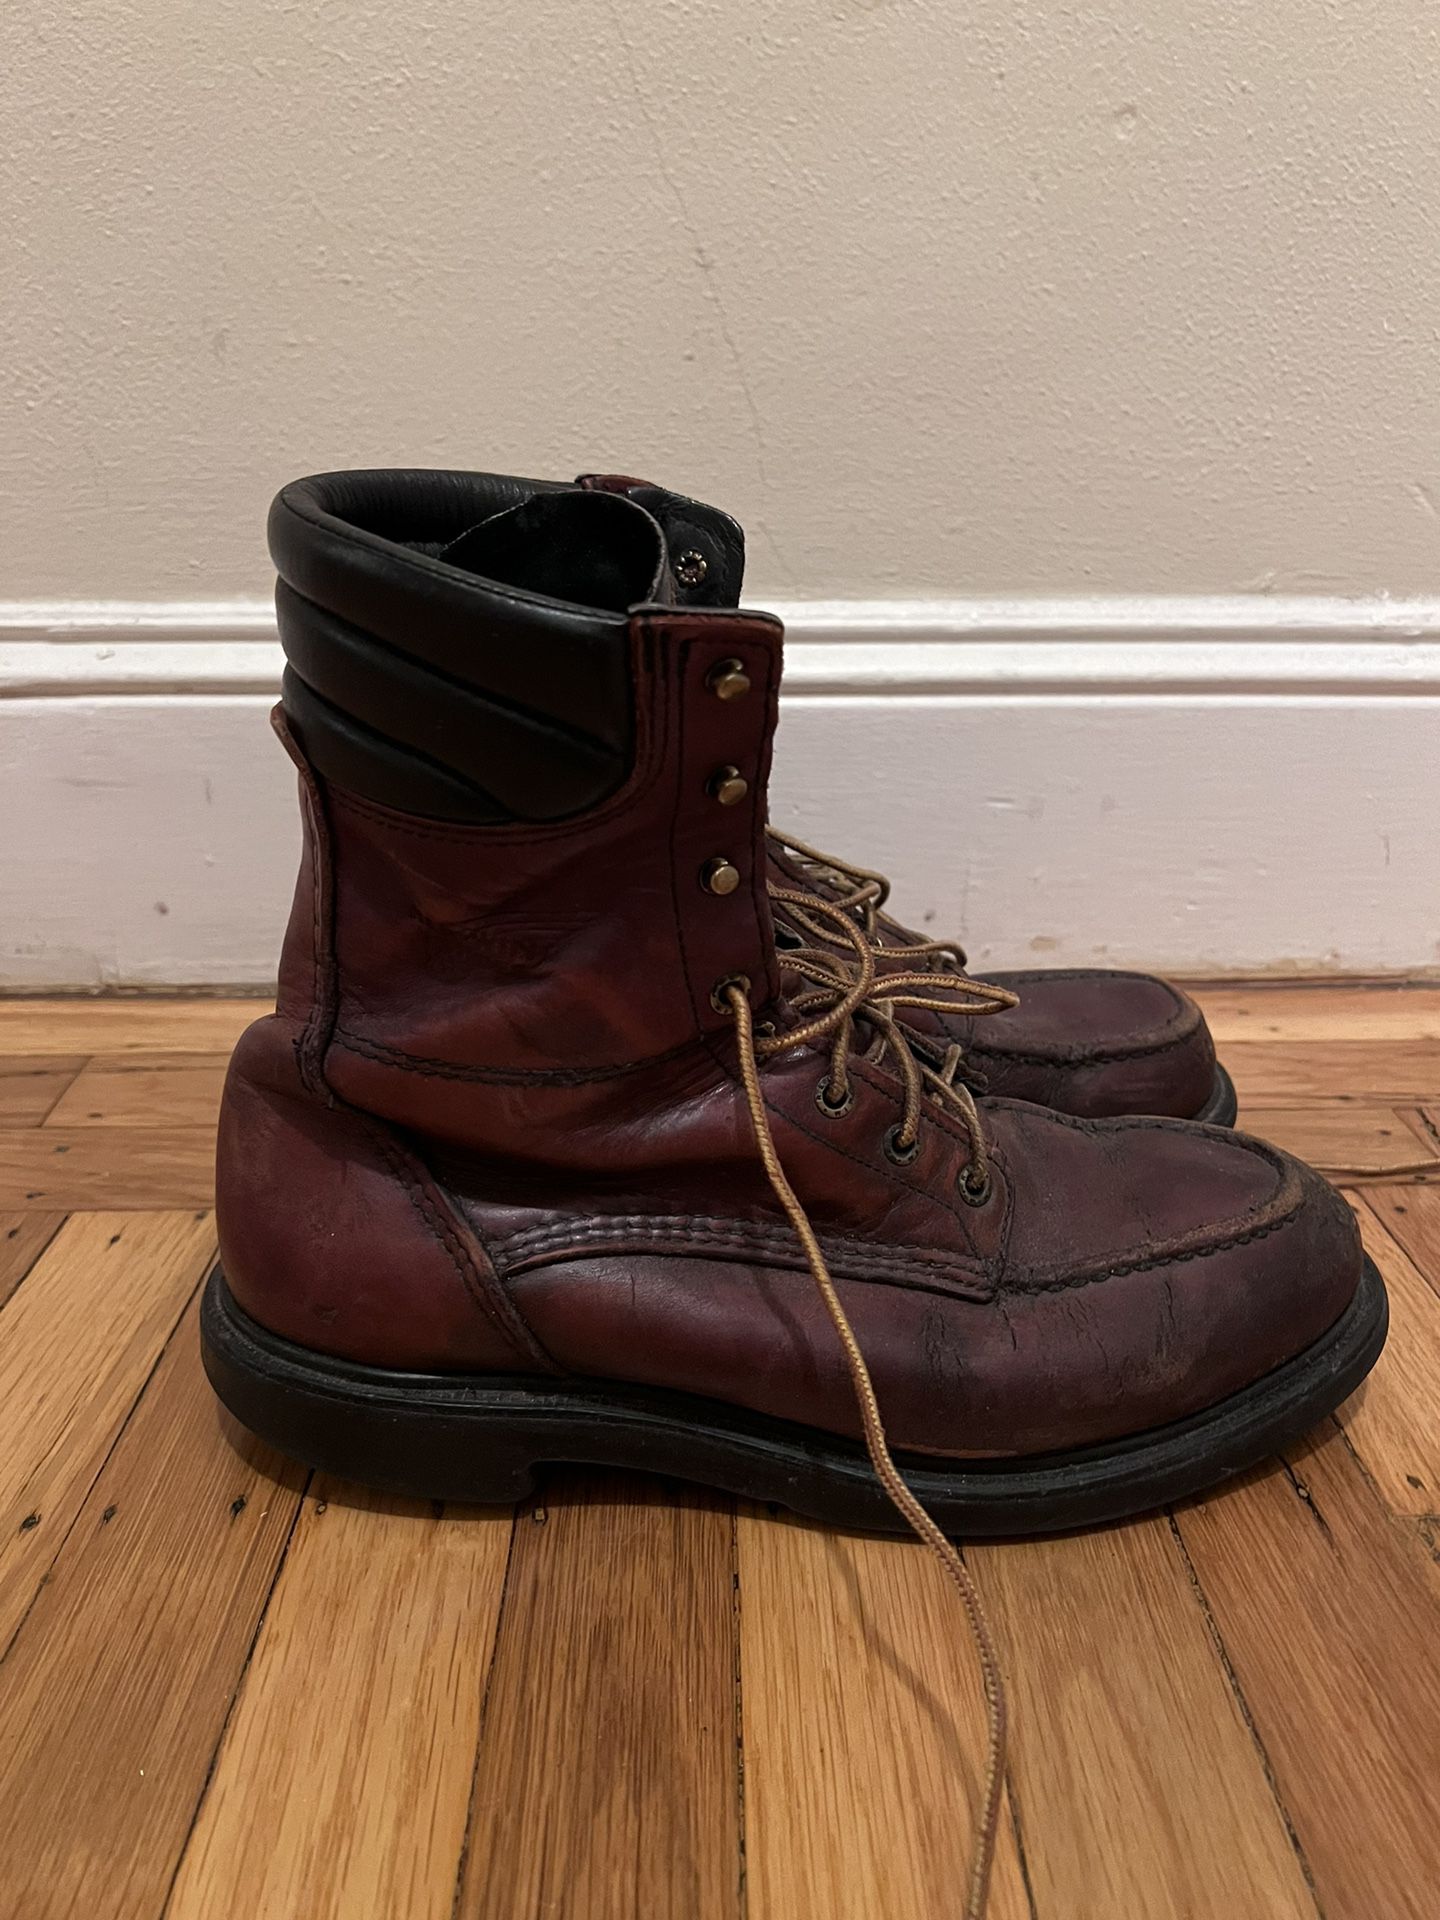 Red Wing Shoes Boots 405 Size 10